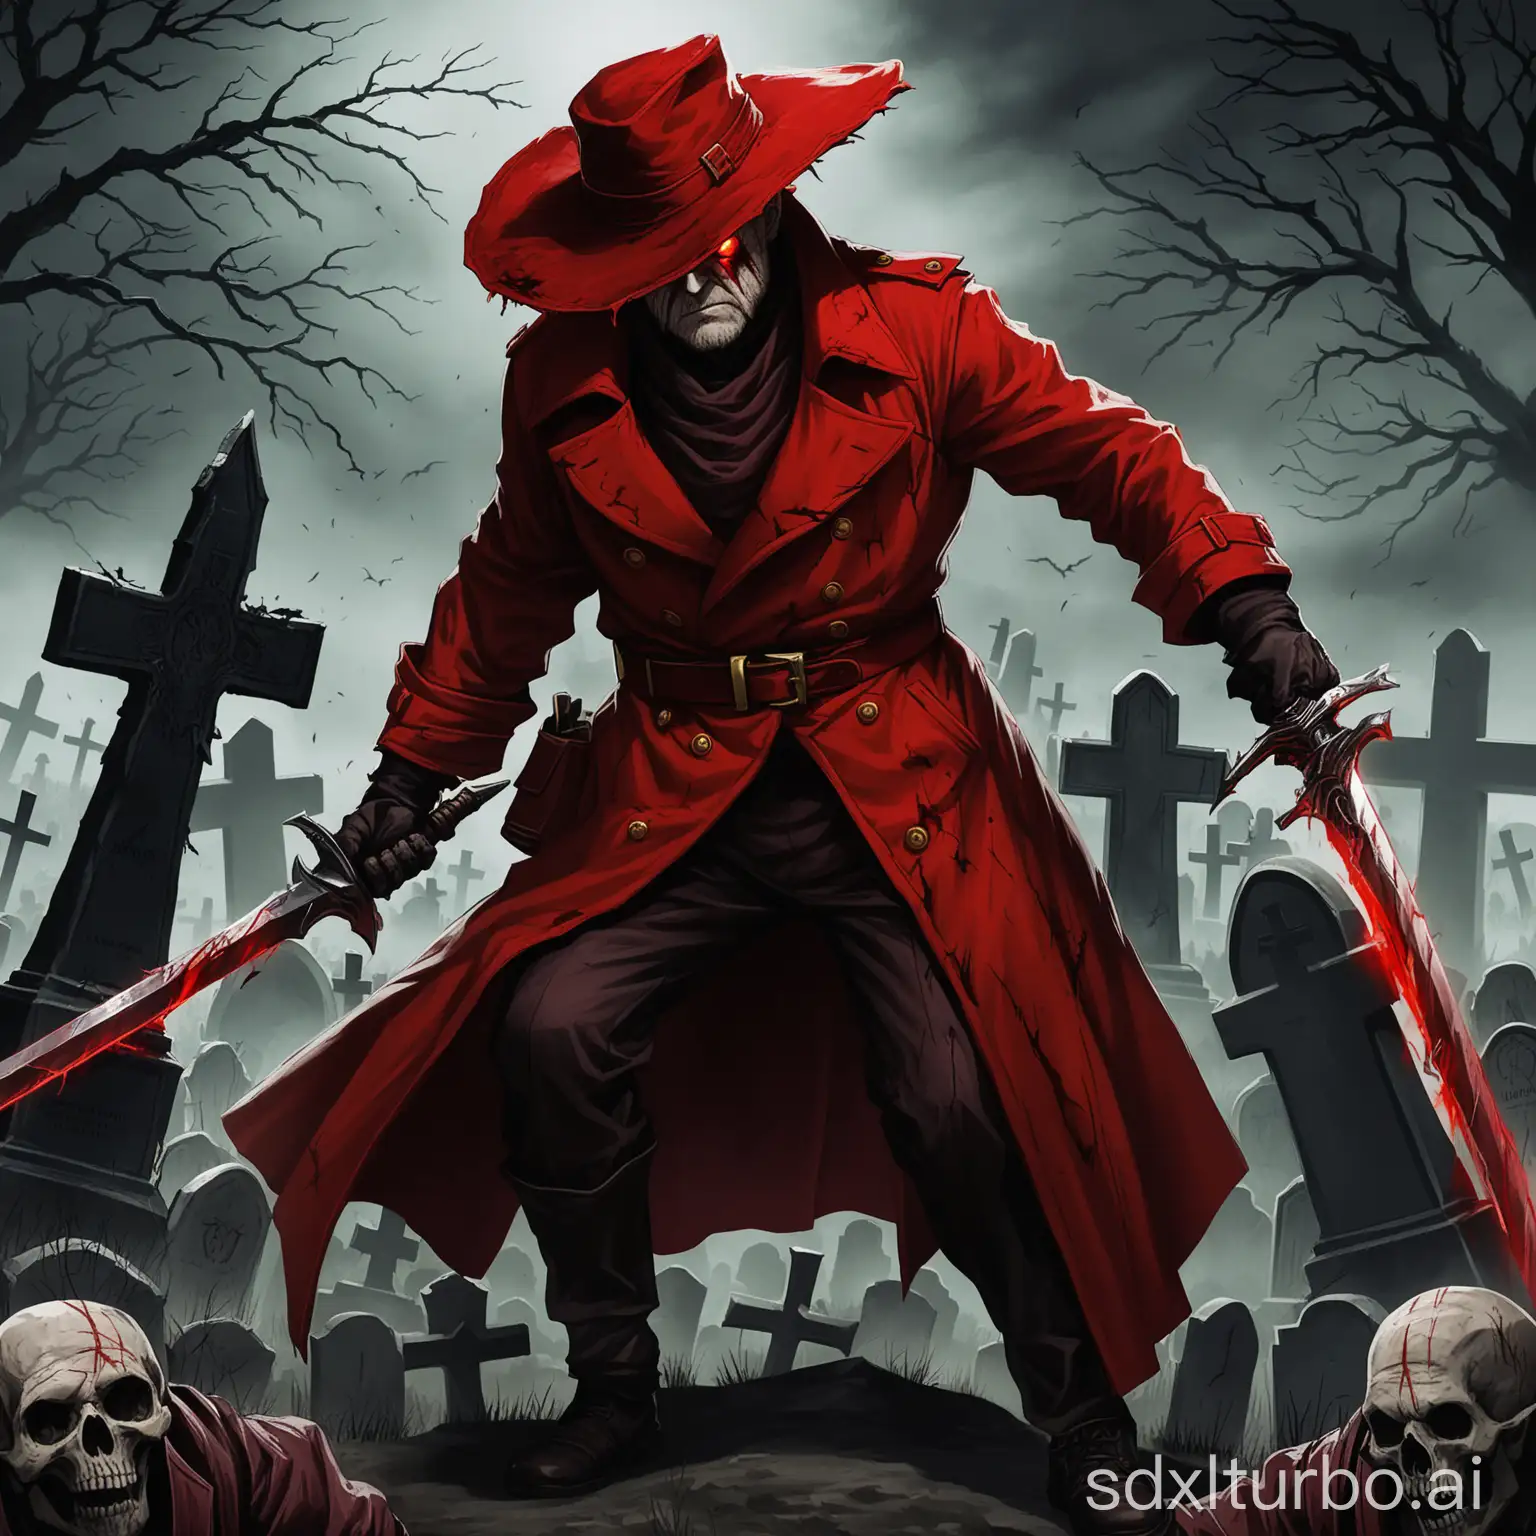 an old blood hunter, wearing a red trenchcoat, a big red hat, yellow belt, fights with a double-sabre and has scars over half his face, no eyebrows, on a graveyard